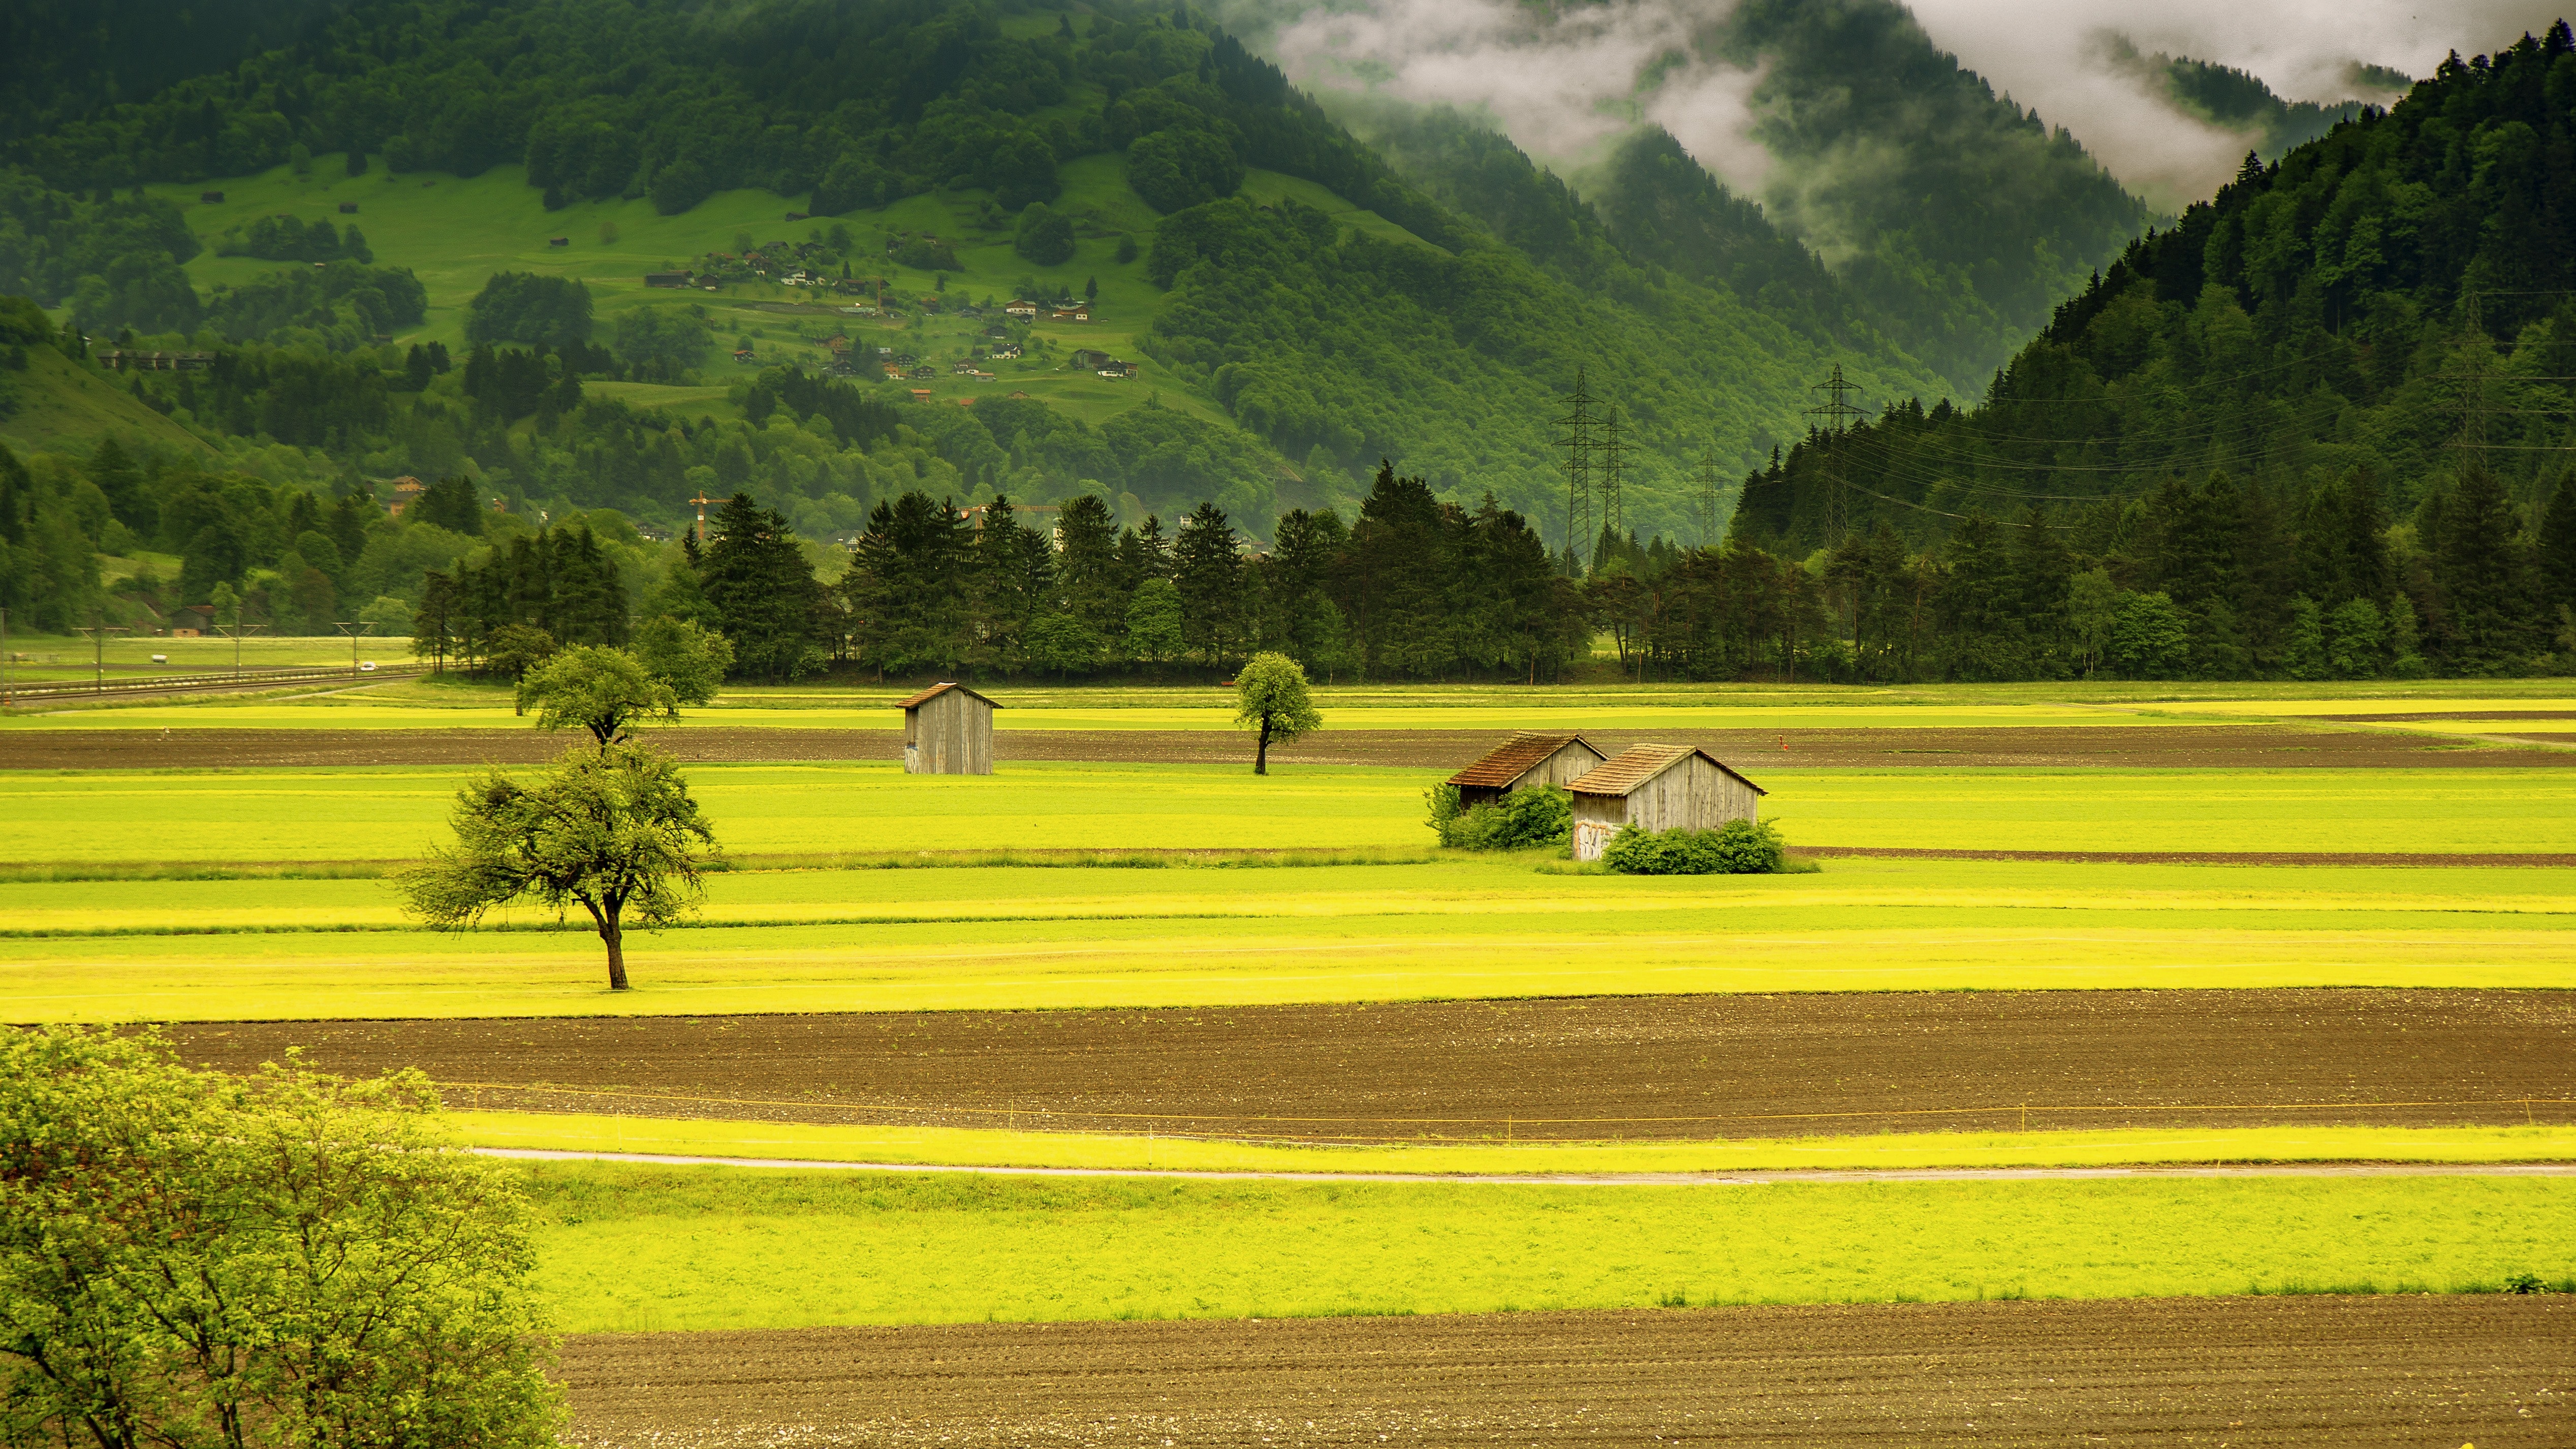 Brown house in the middle of green field grass near mountains photo